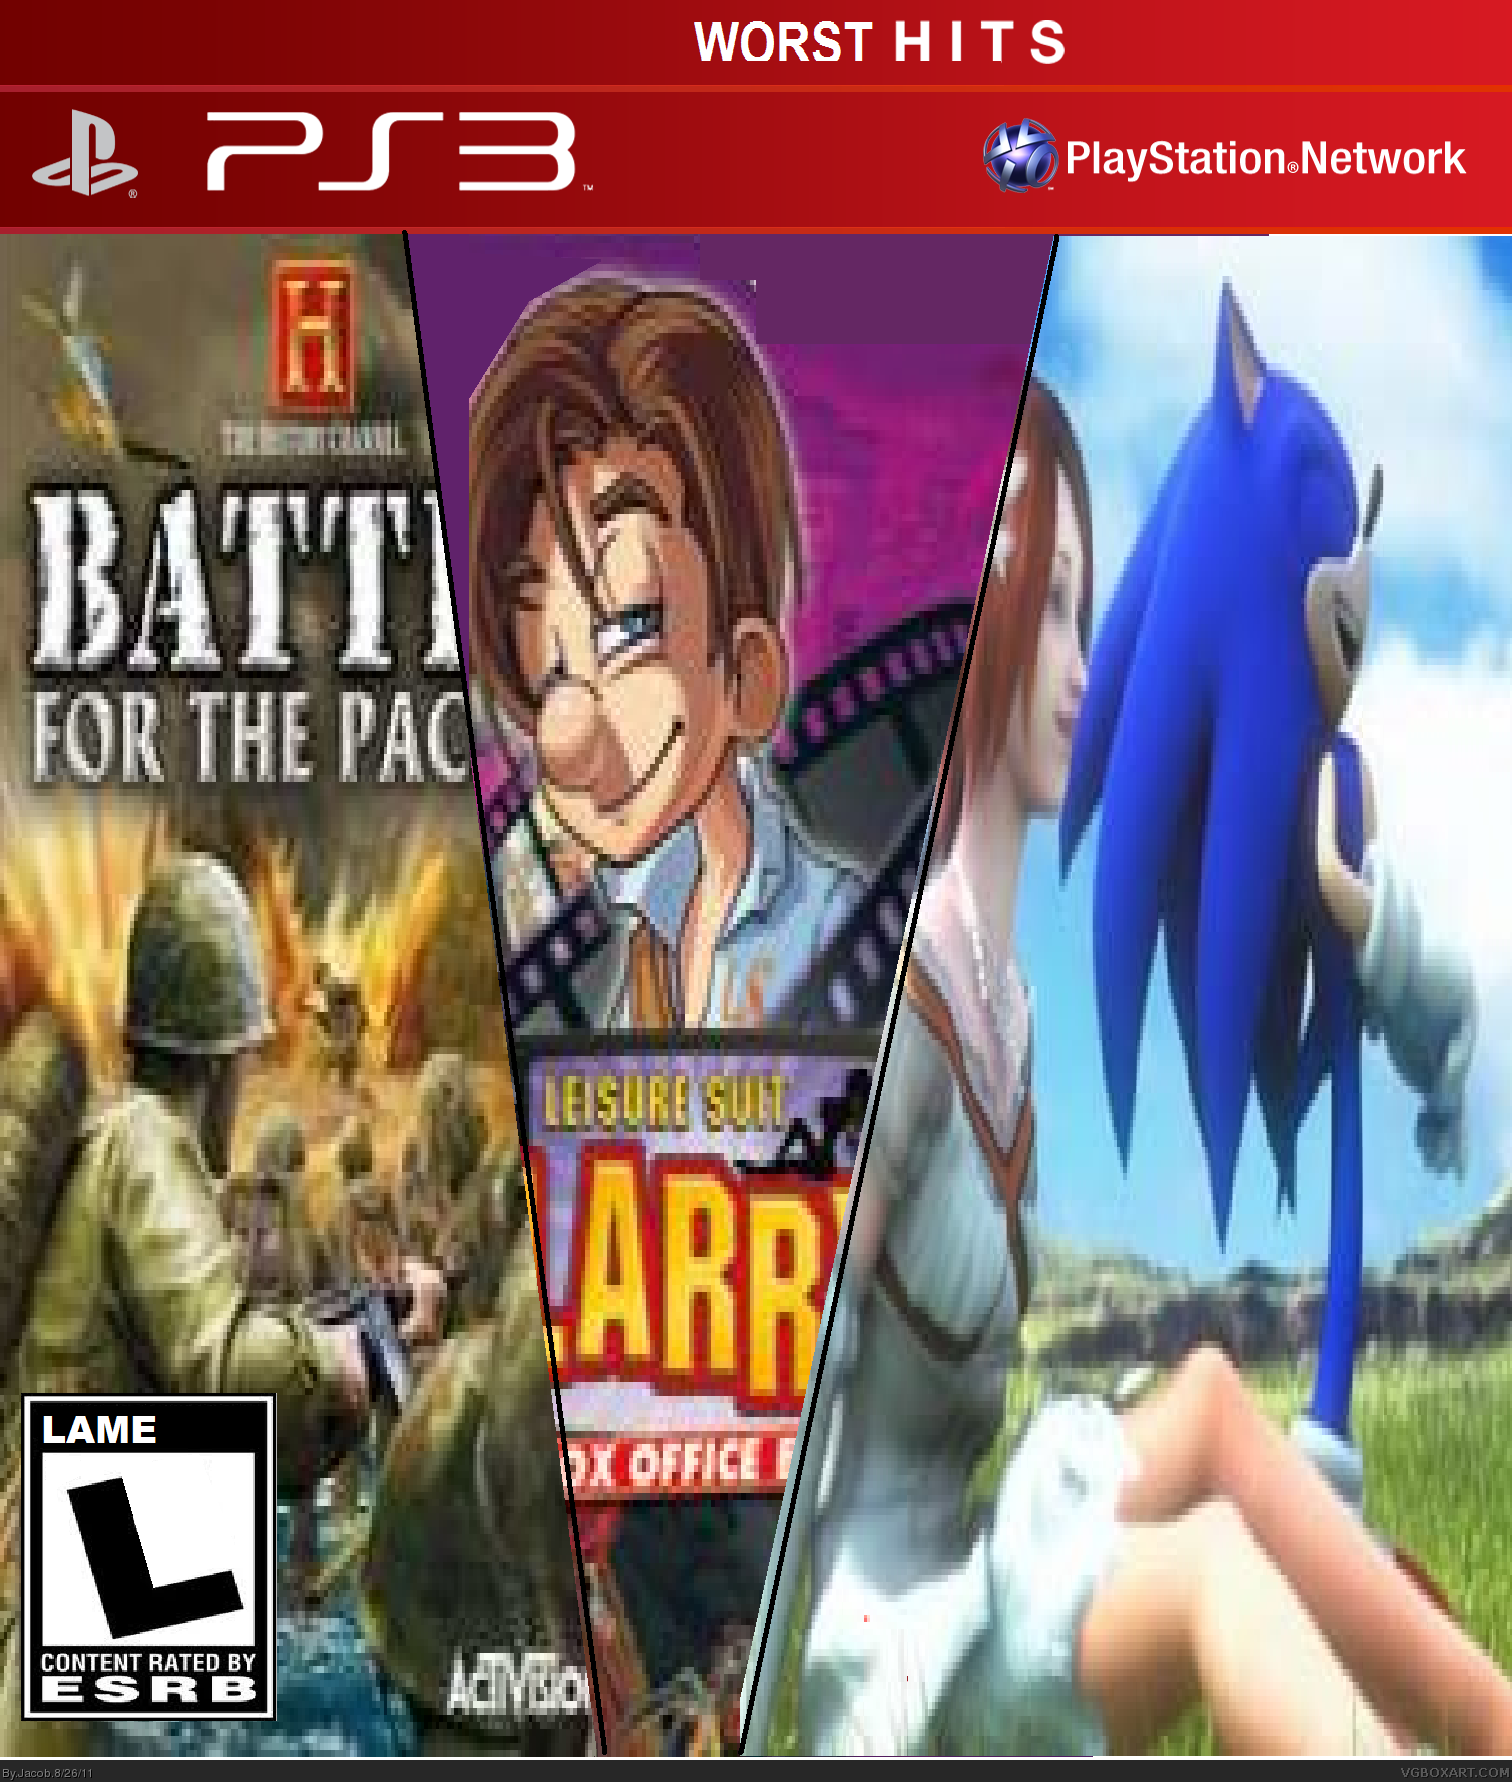 PS3 Worst Hits box cover